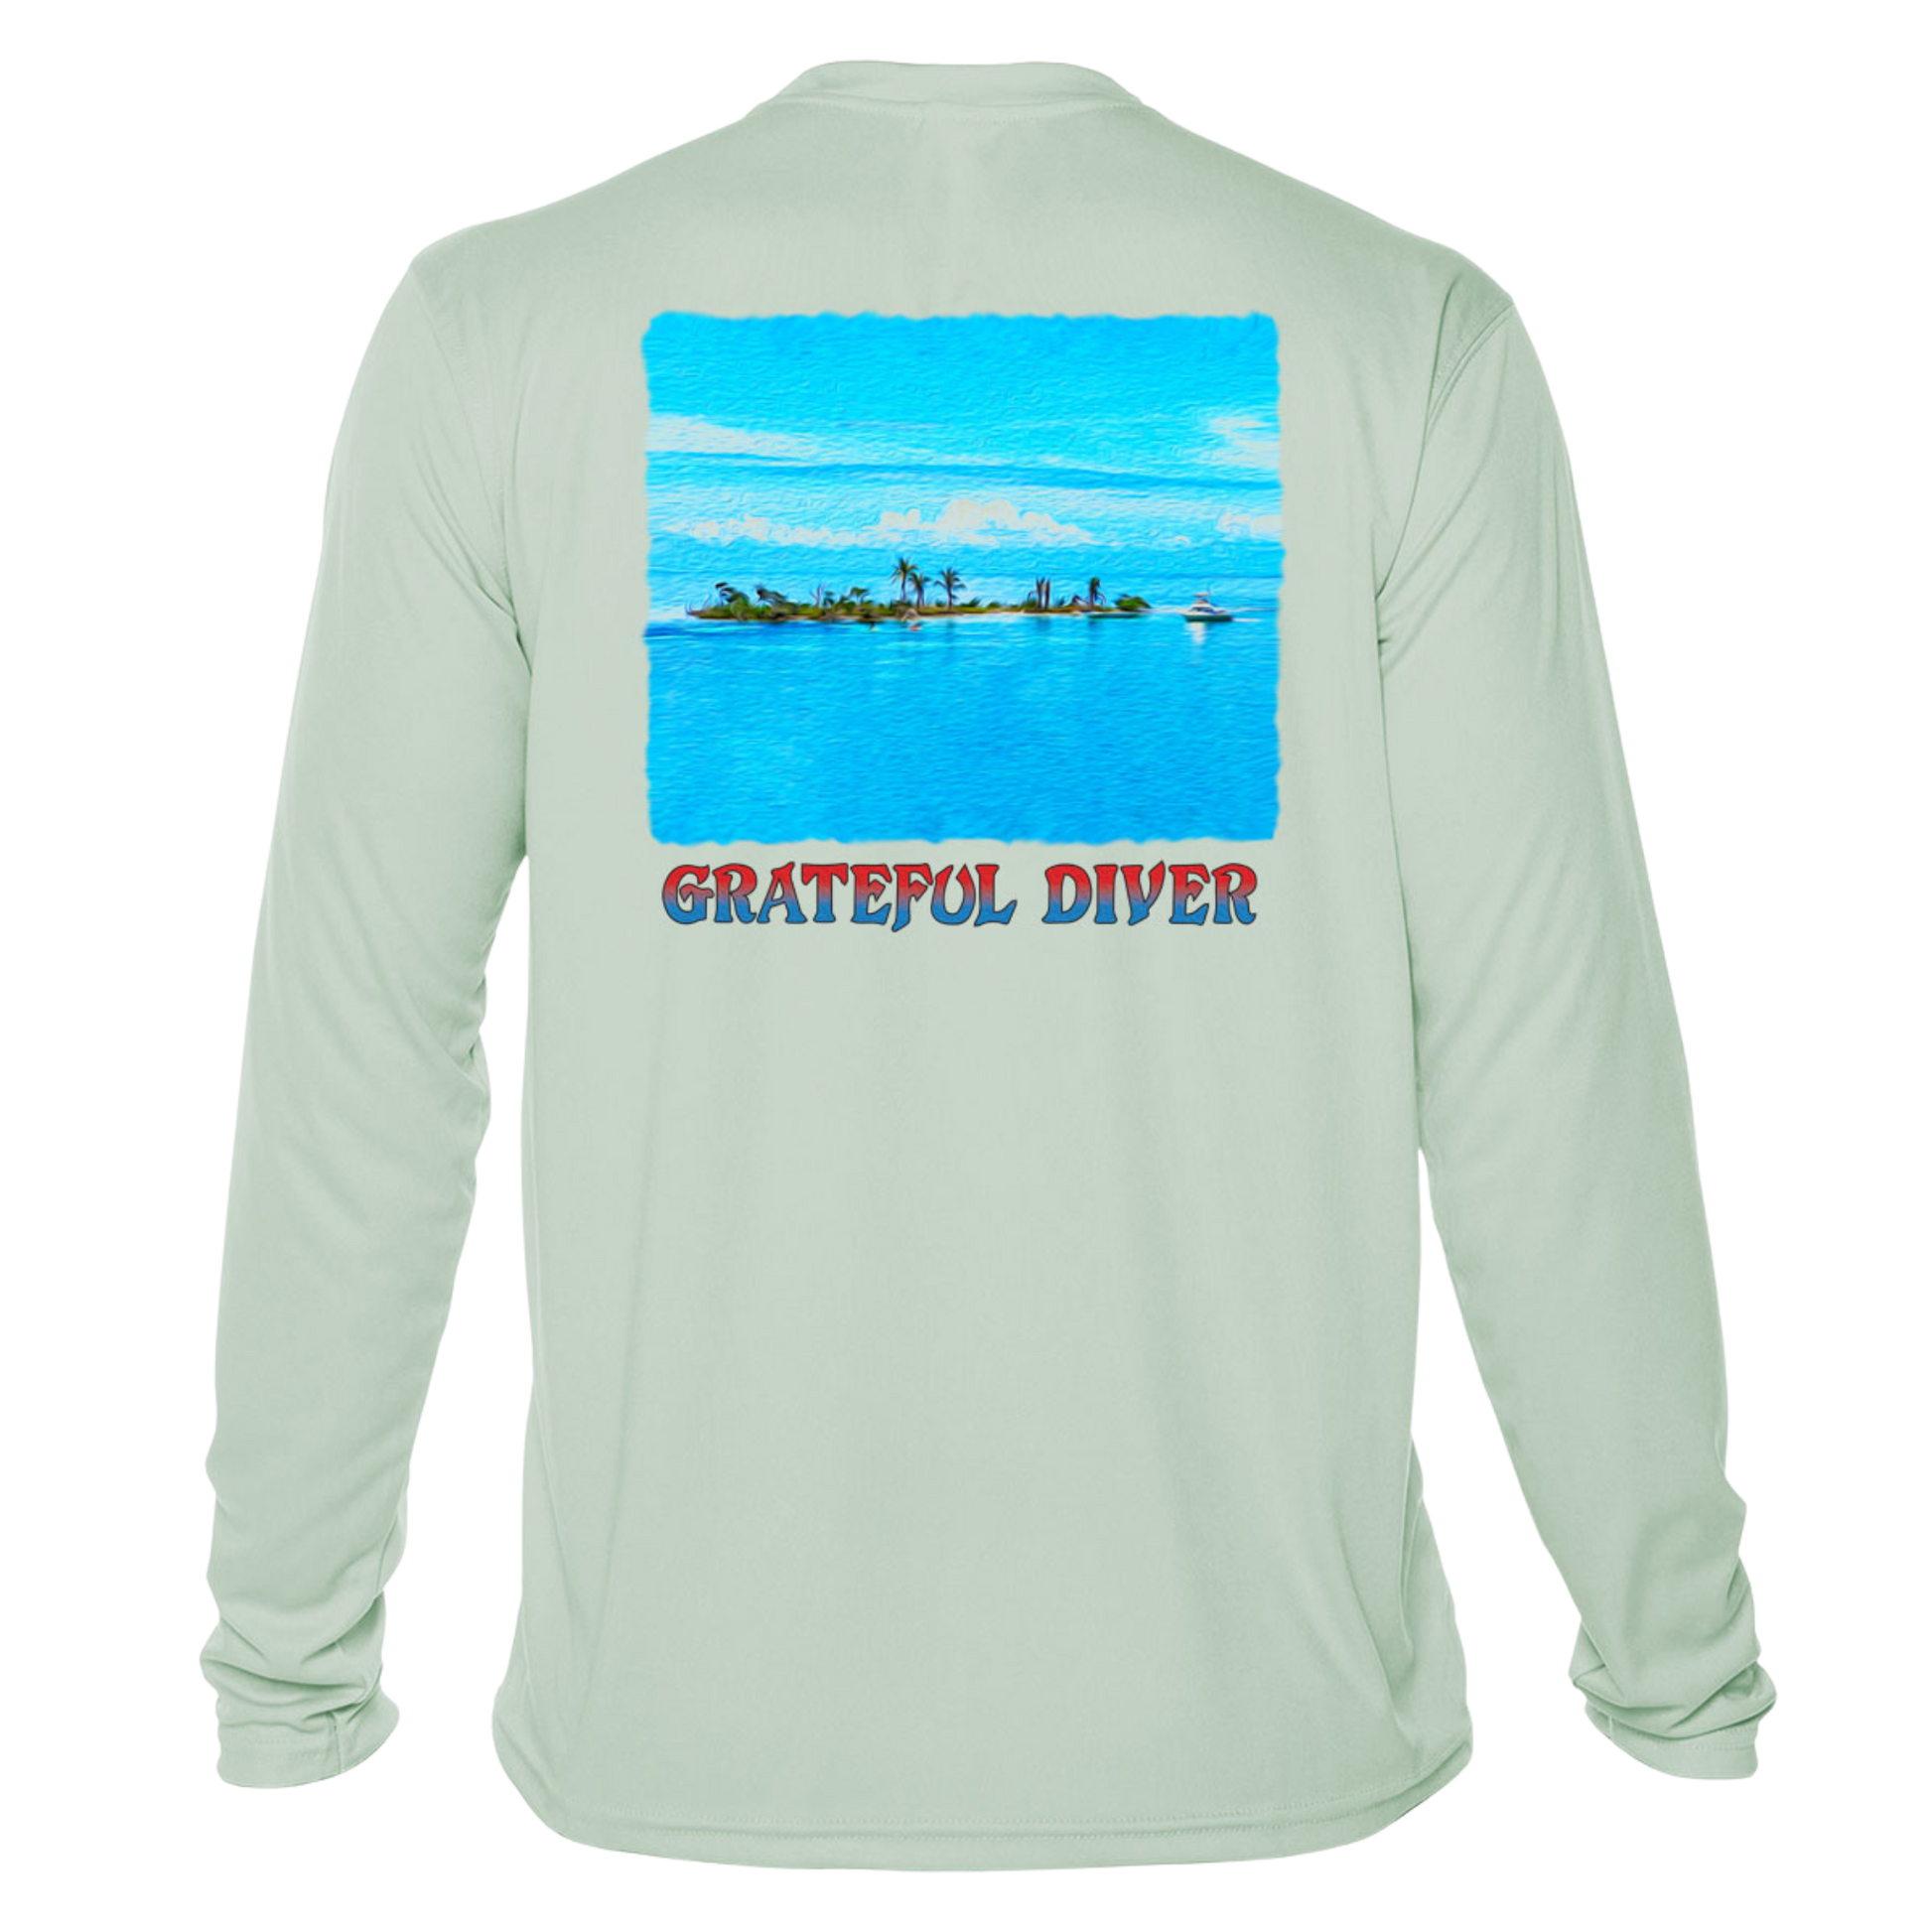 back of Grateful Diver's Artist's Collection: Island Life UV Shirt in seagrass showing an island surrounded by blue water and sky